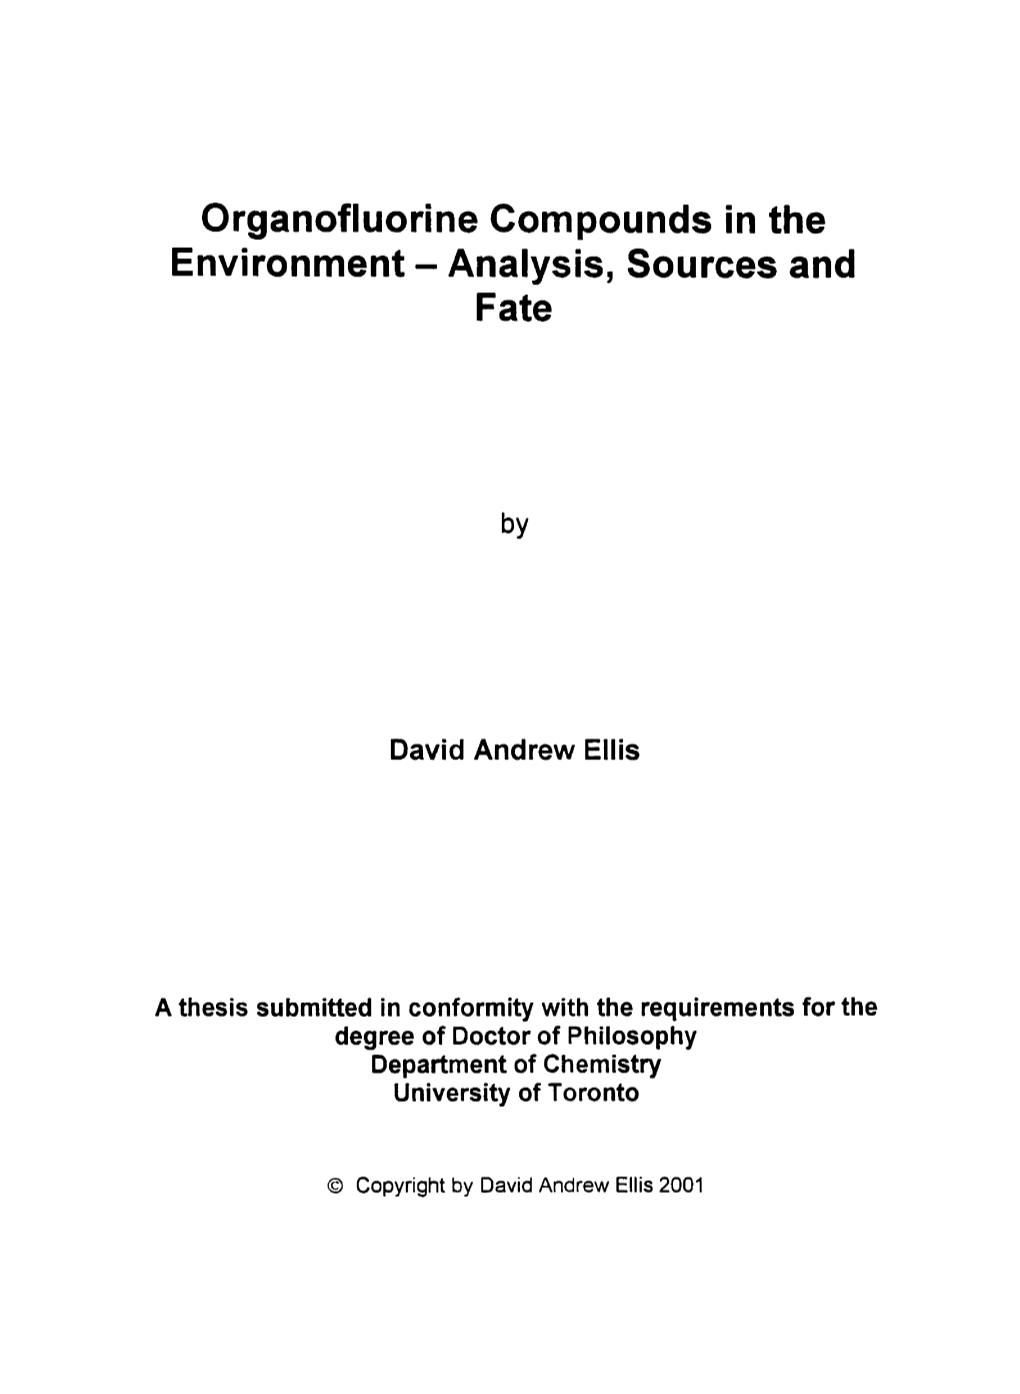 Organofluorine Compounds in the Environment - Analysis, Sources And